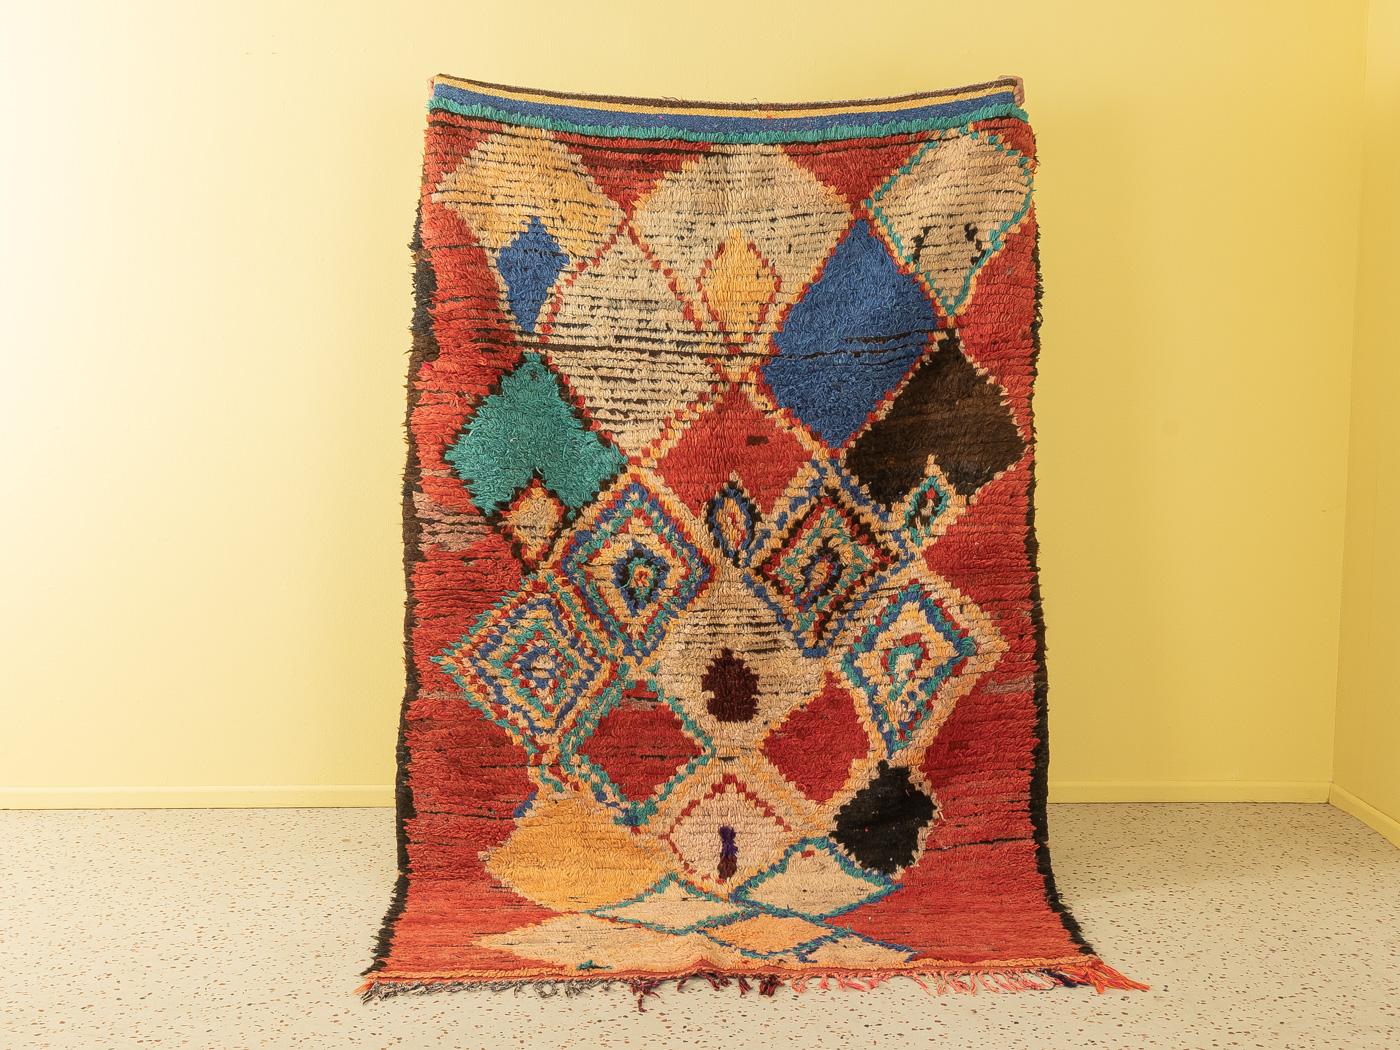 This Vintage Azilal is a 100 % wool rug – soft and comfortable underfoot. Our Berber rugs are handmade, one knot at a time. Each of our Berber rugs is a long-lasting one-of-a-kind piece, created in a sustainable manner with local wool.
Quality